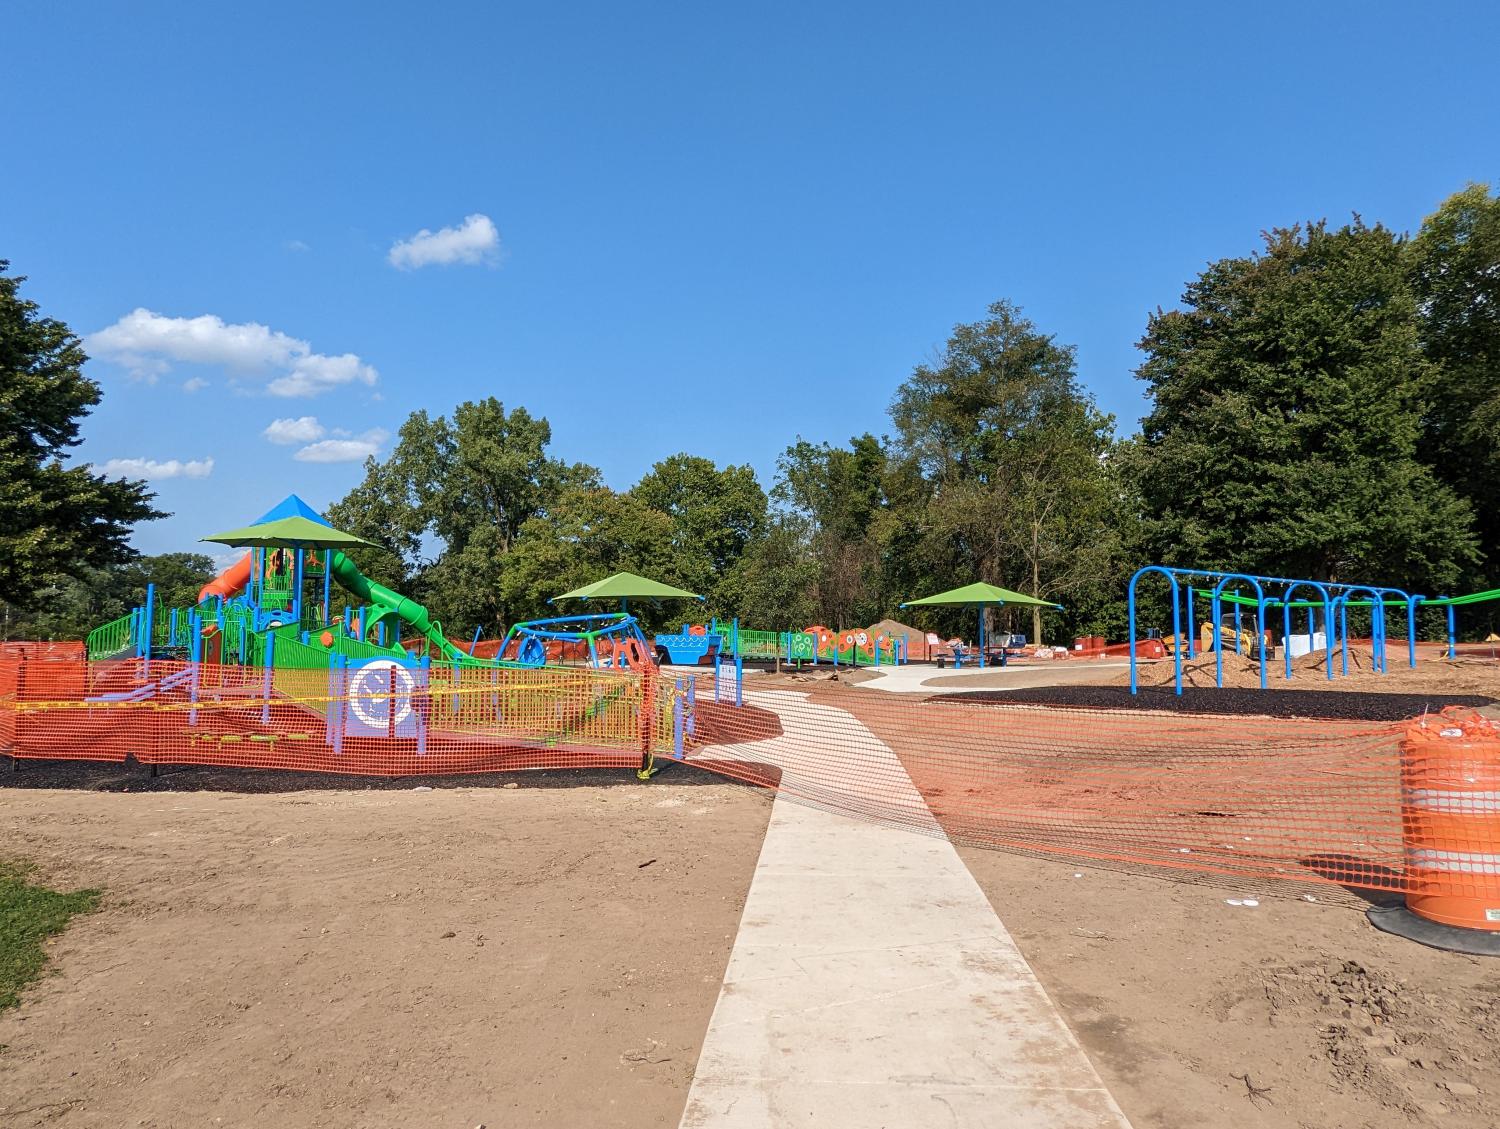 Coming soon - a new inclusive playground